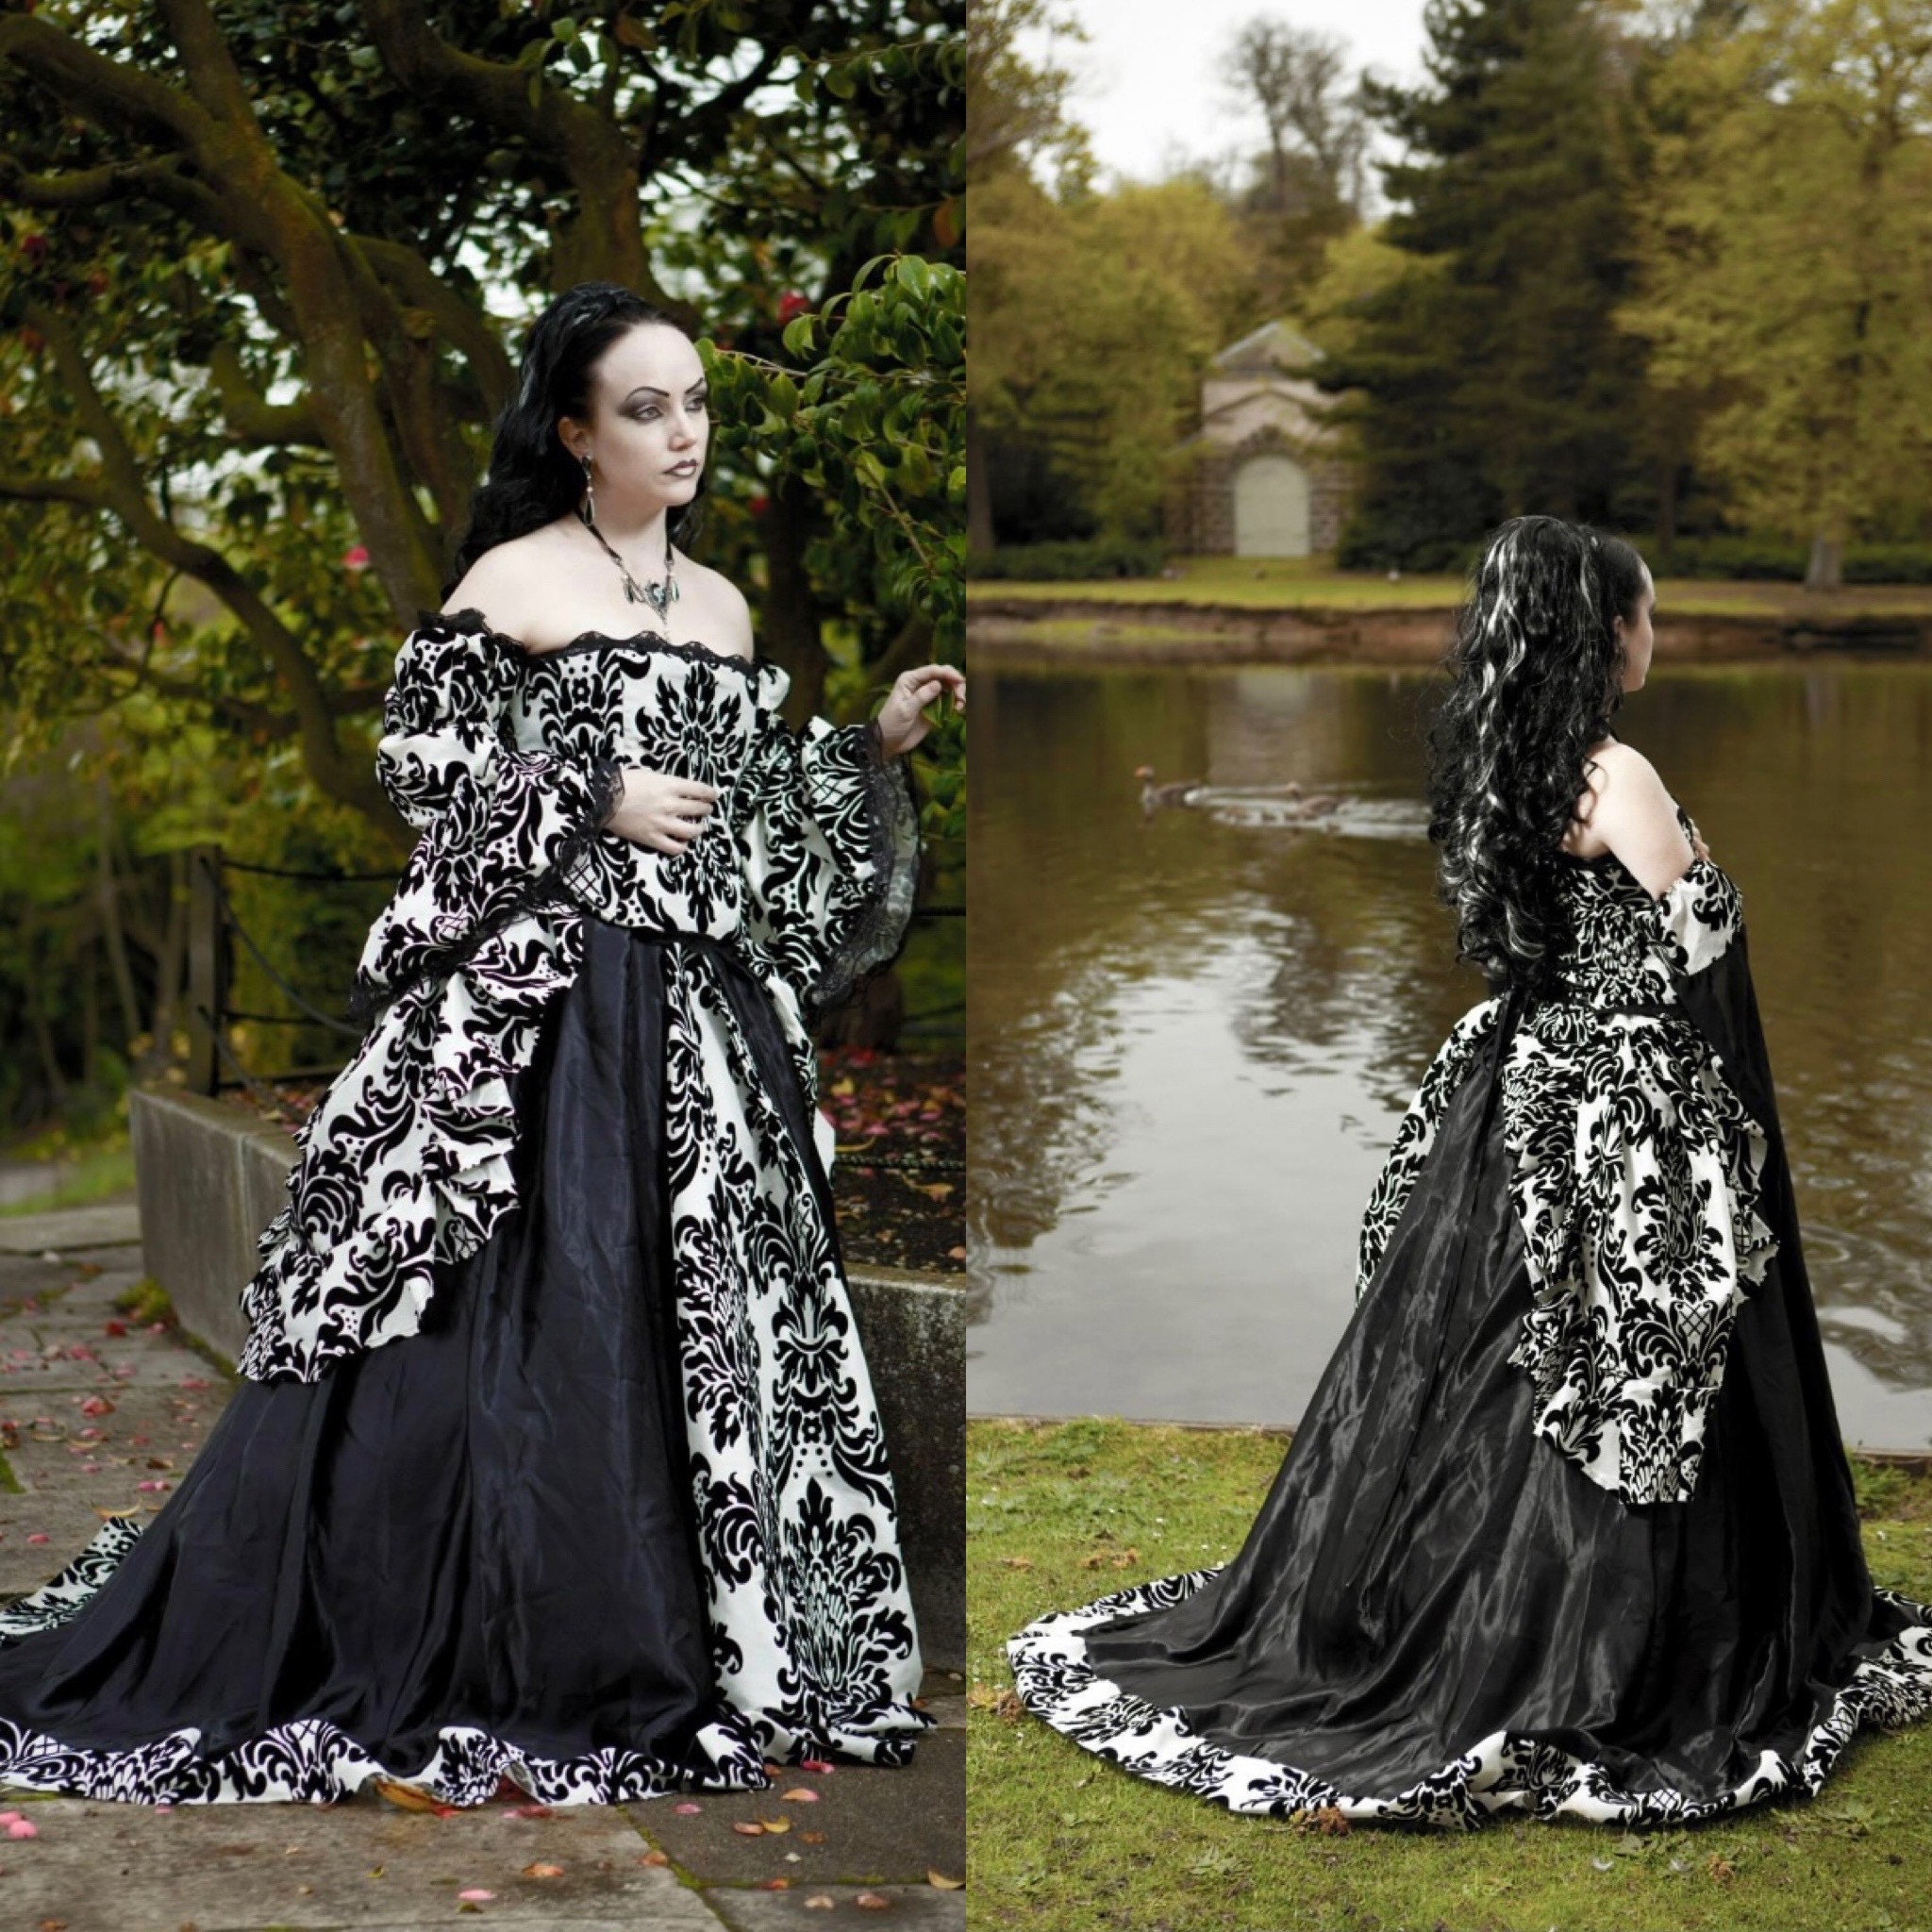 Made to Order Beautiful Gothic Vampire Marie Antoinette Gown -  Denmark